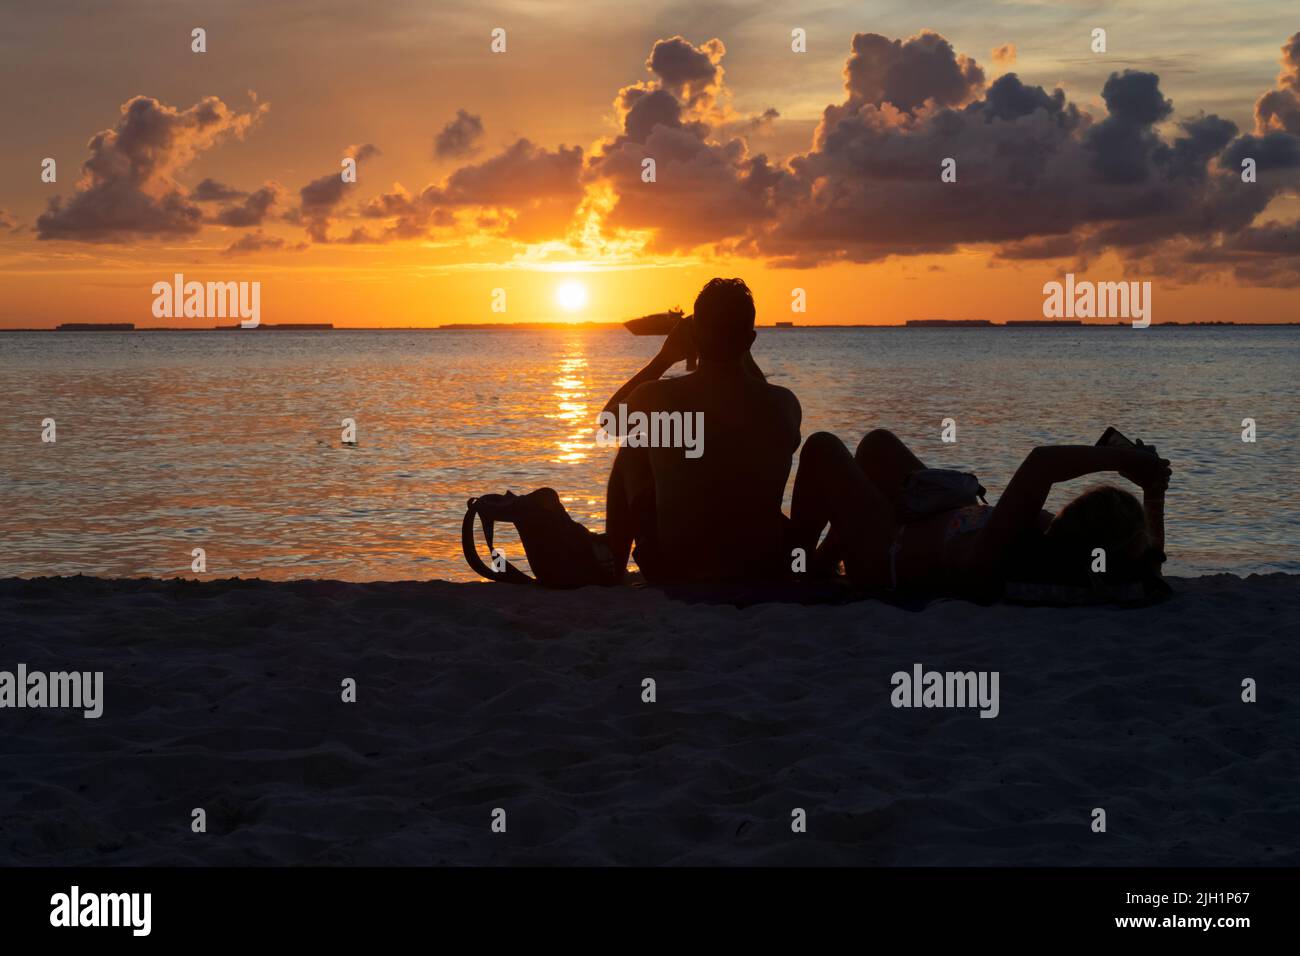 Silhouette of a tourist couple at sunset on a tropical island beach at sunset in Mexico Stock Photo